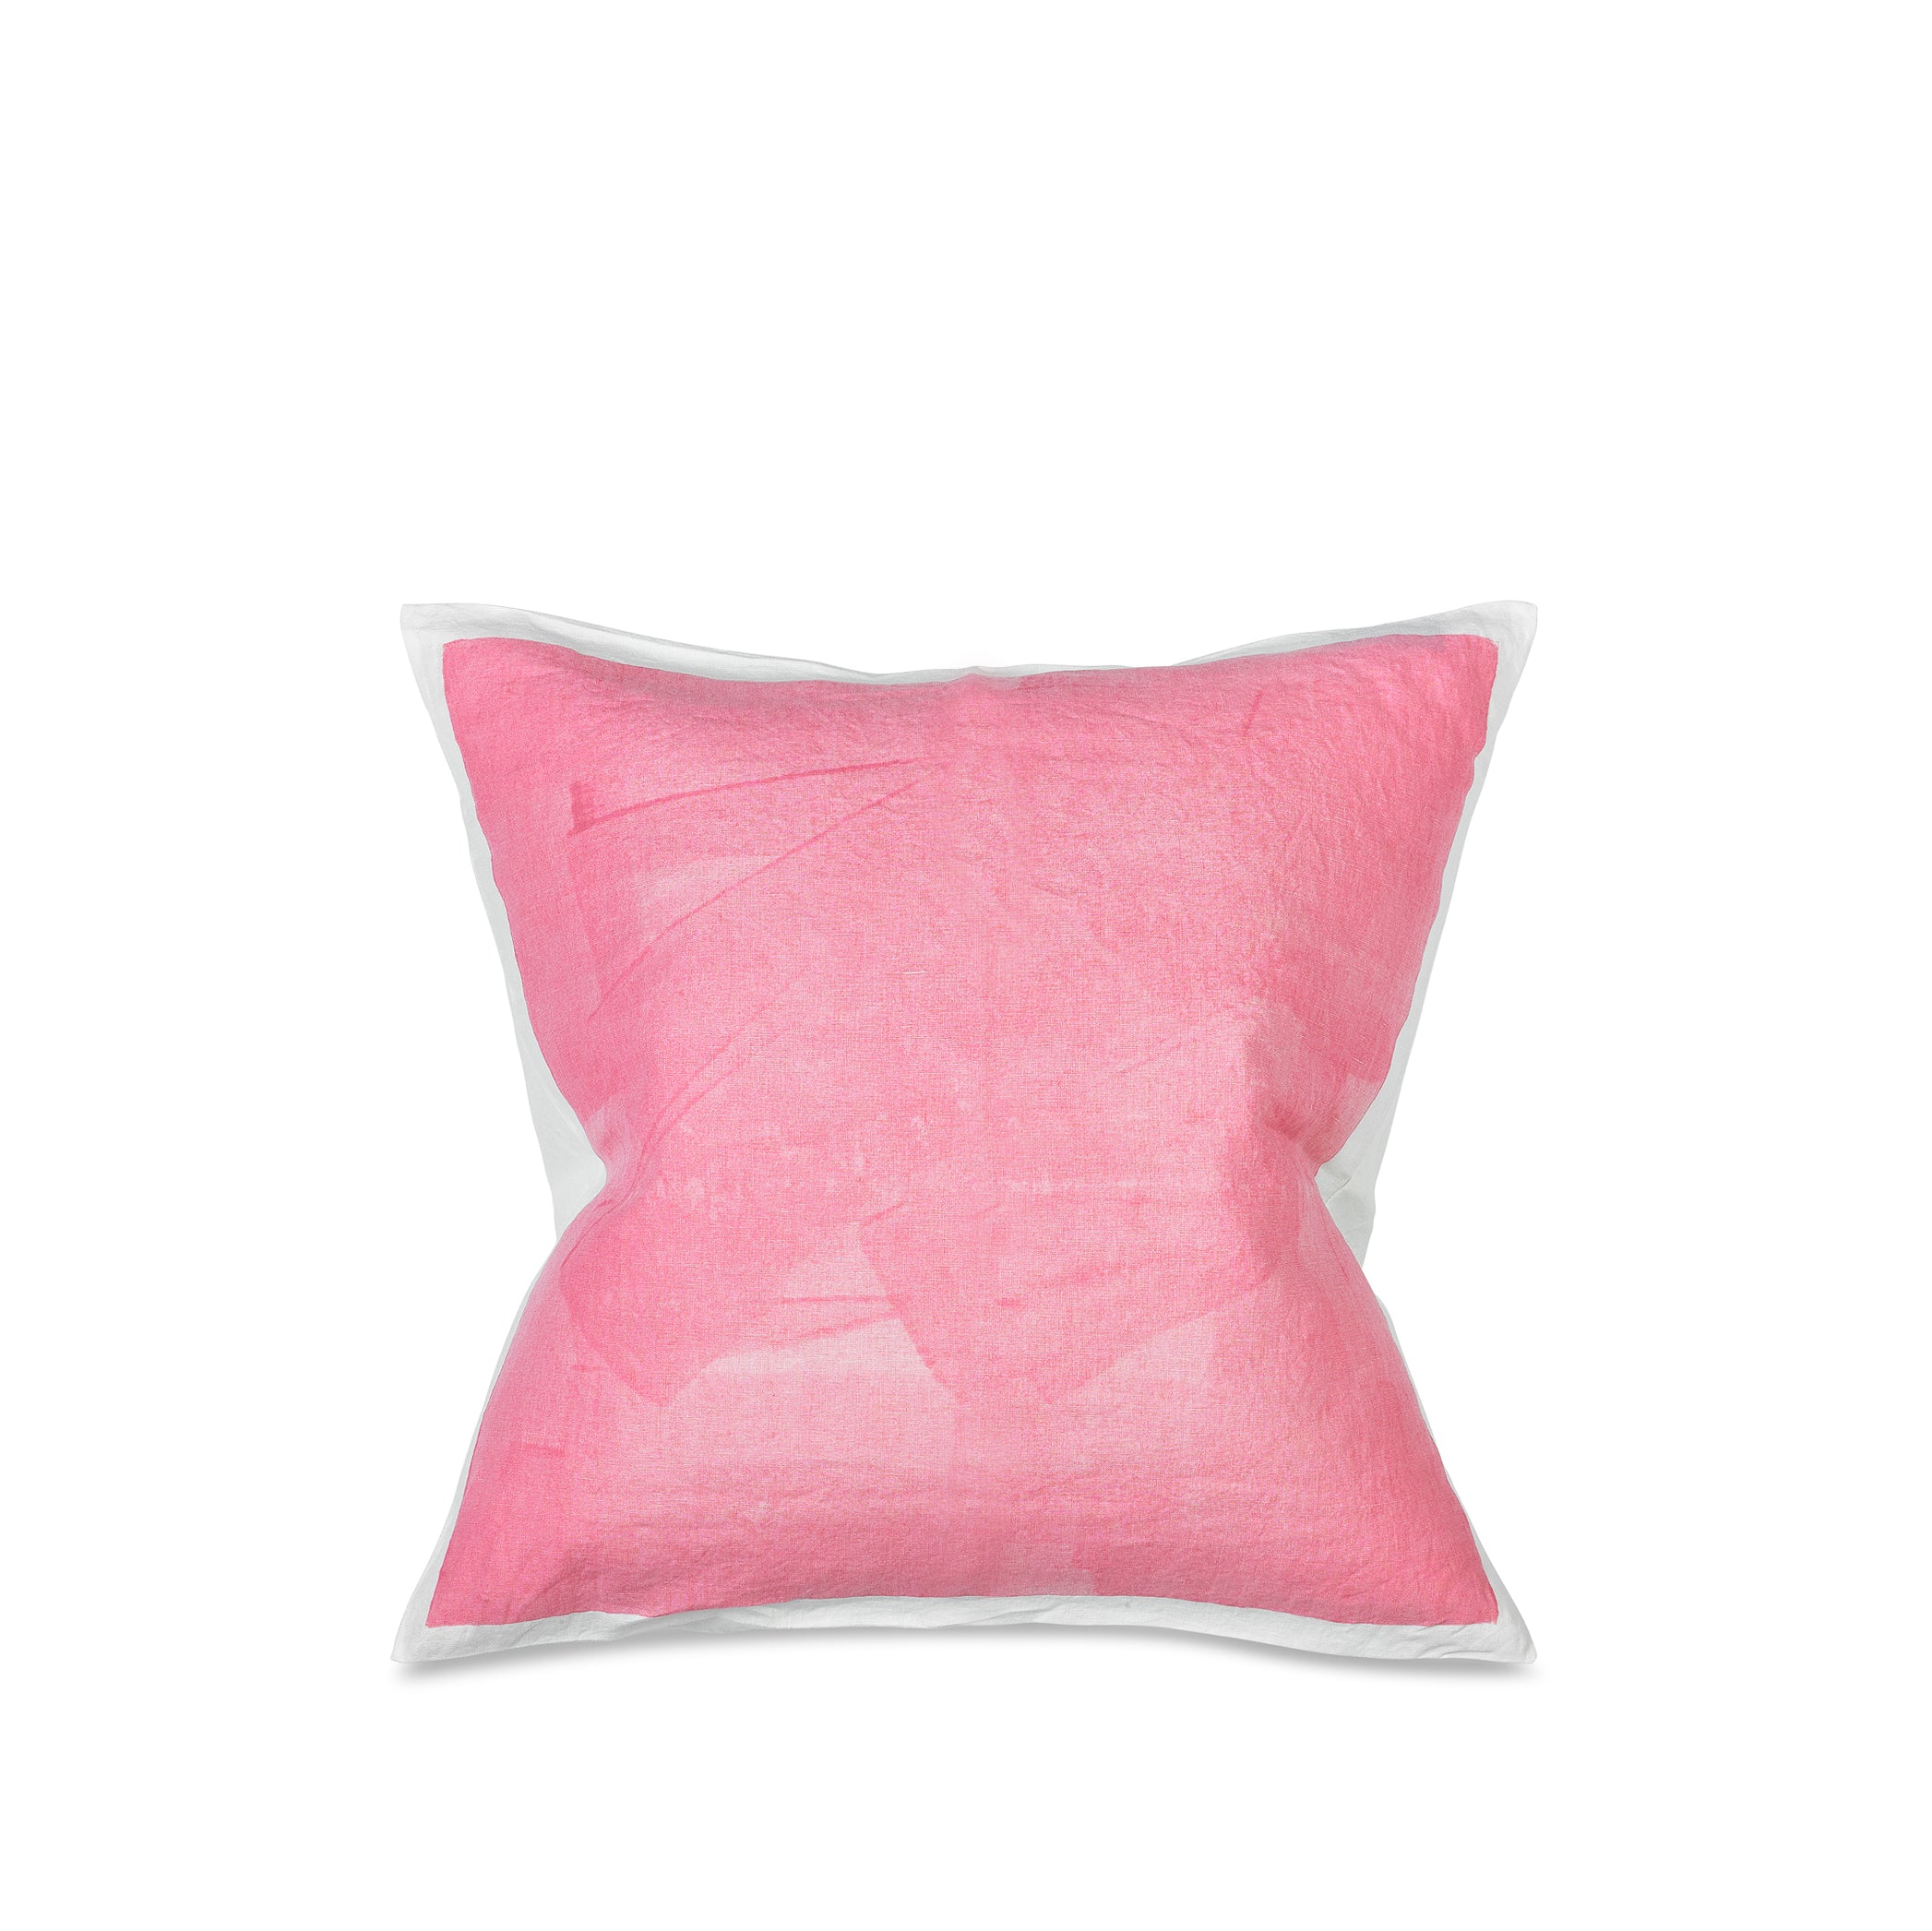 Hand Painted Linen Cushion in Rose Pink, 60cm x 60cm